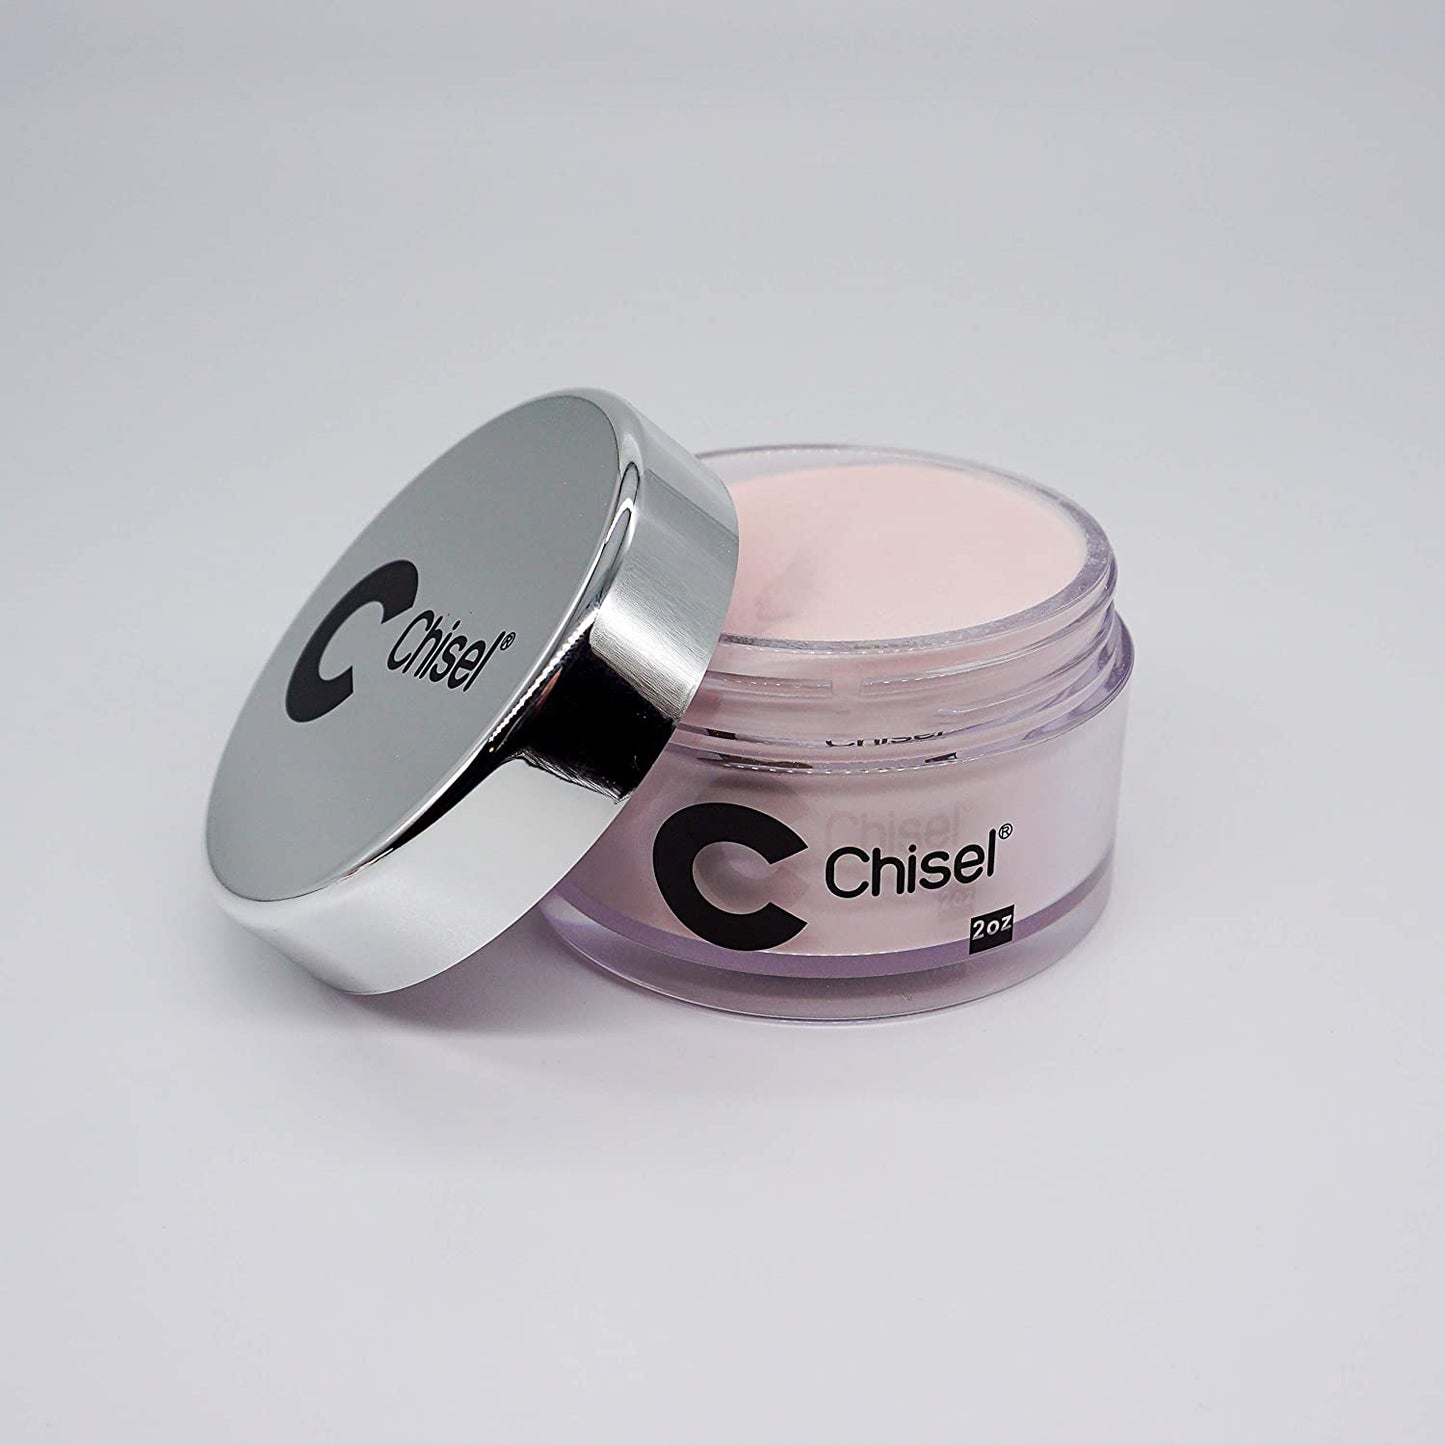 Chisel Nail Art 2 in 1 Acrylic & Dipping Powder Solid #012